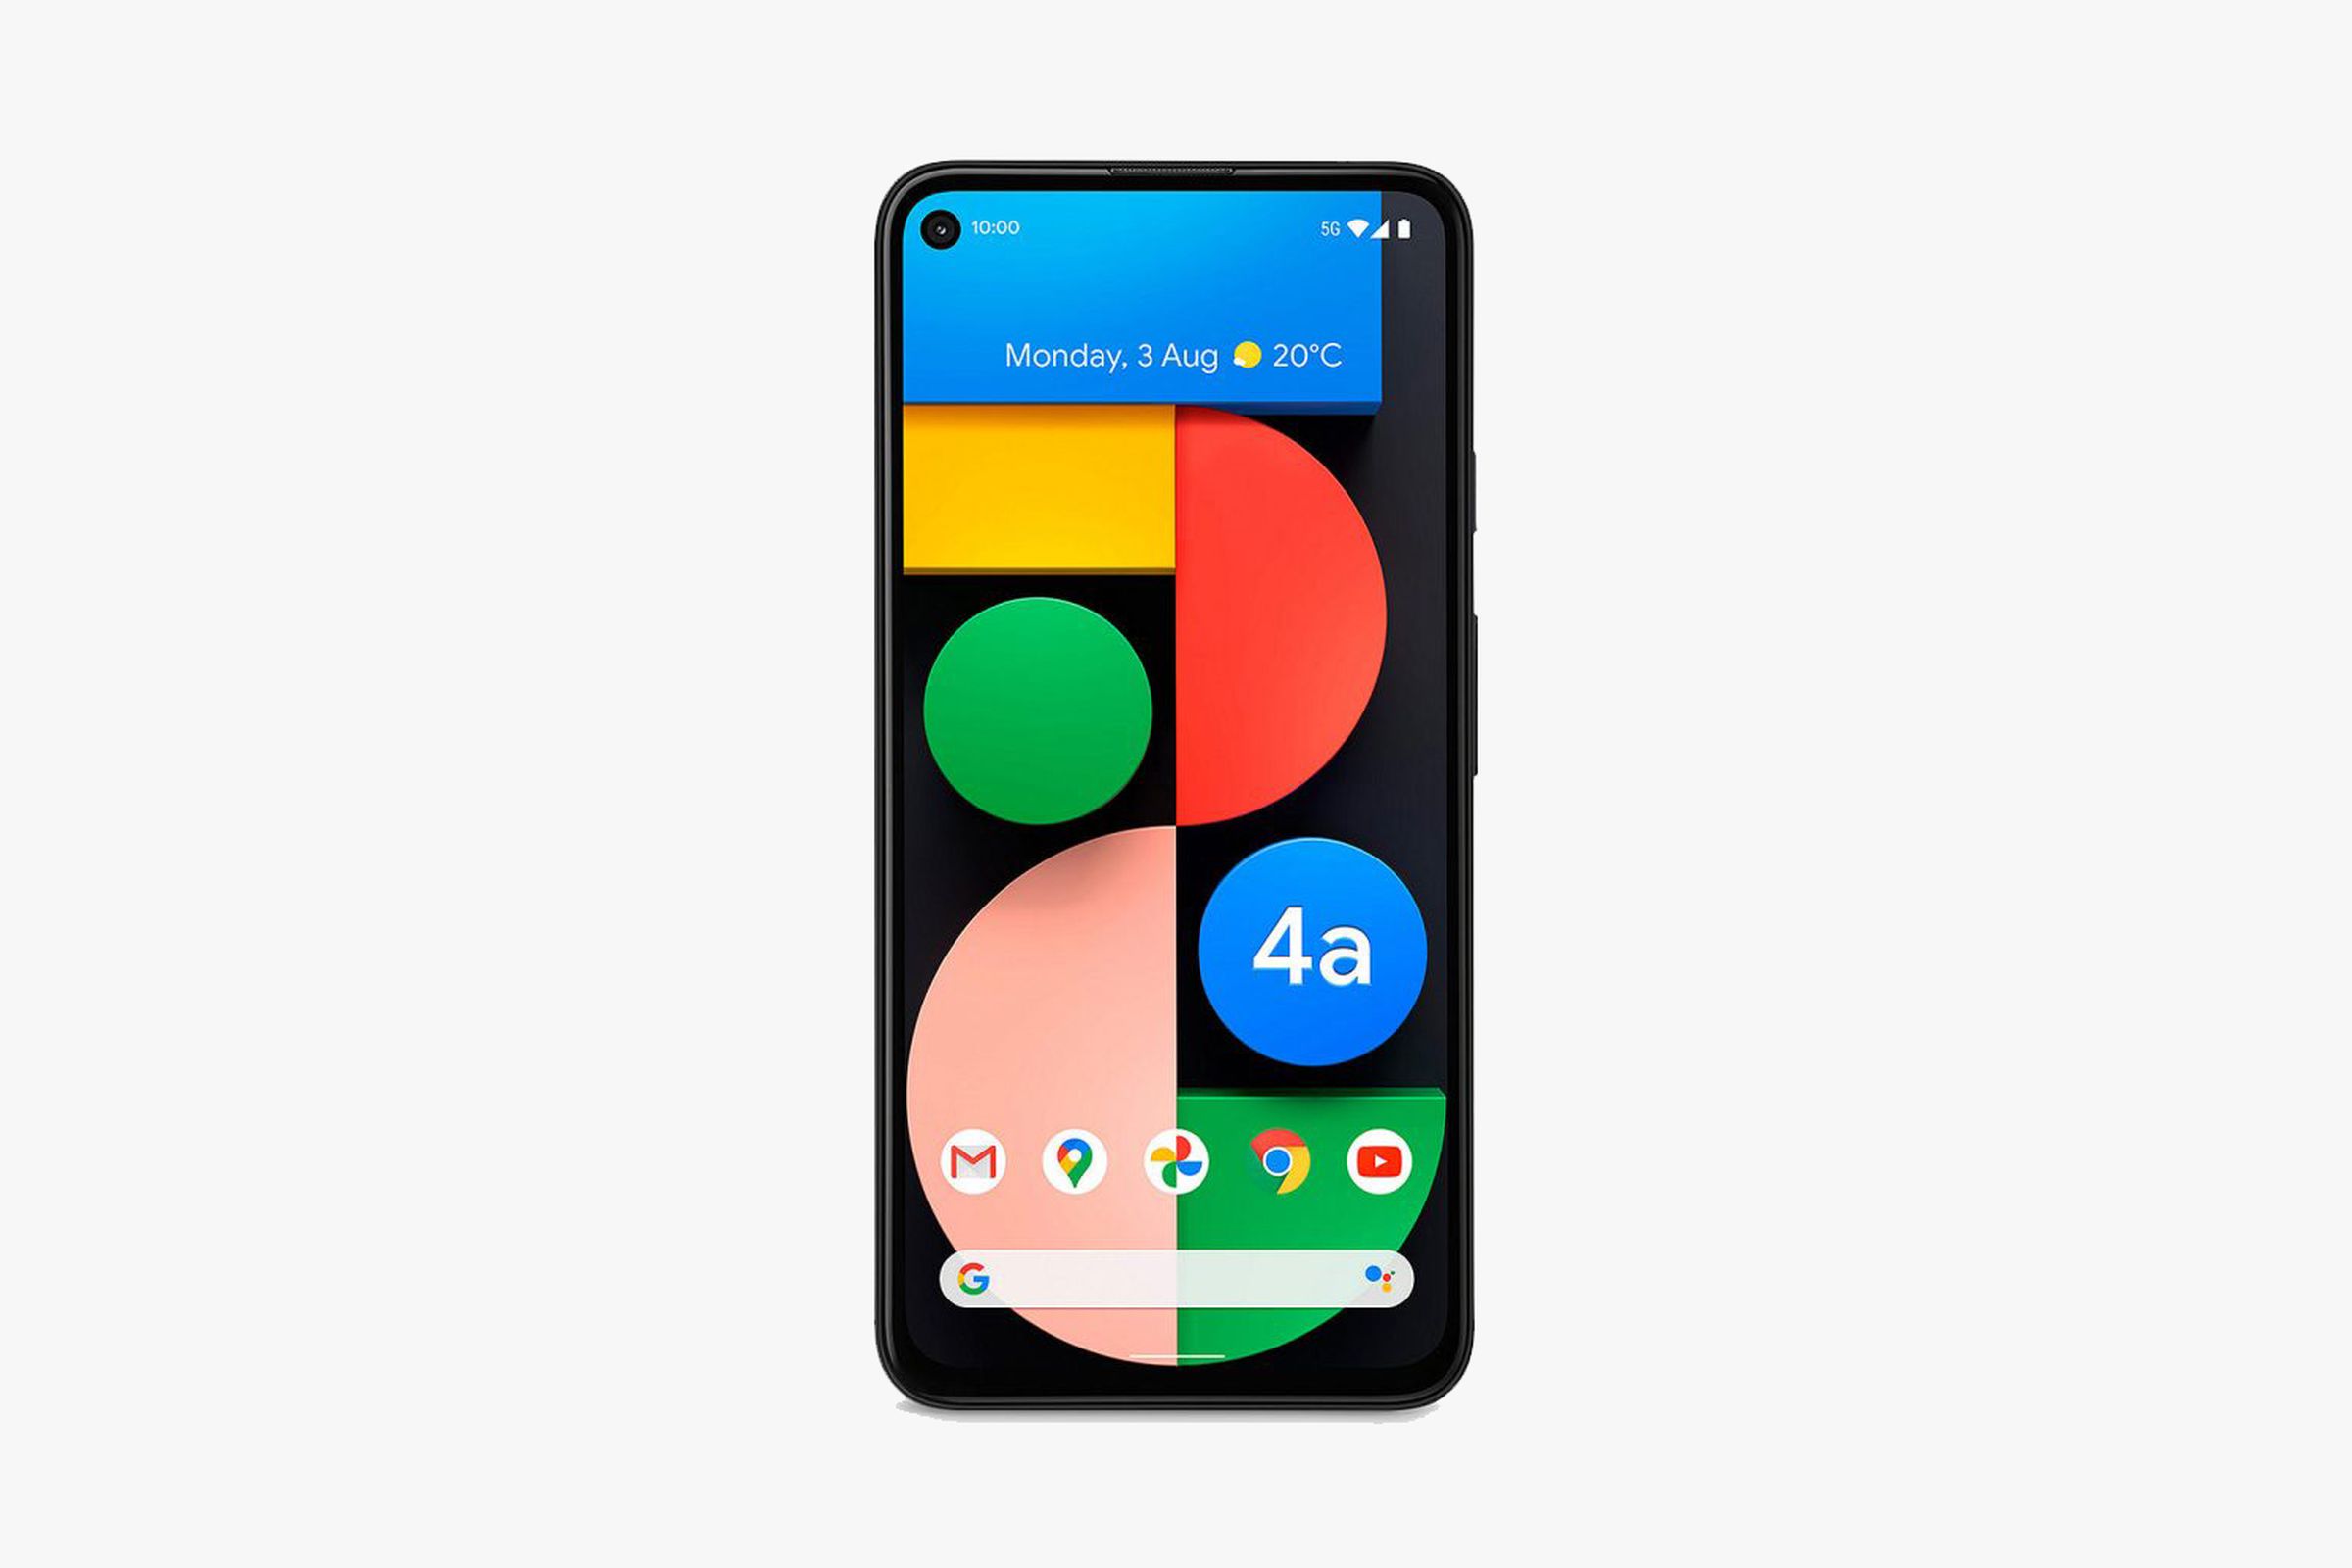 The images show a similar looking device to the Pixel 4A, but there’s a 5G logo in the status bar.